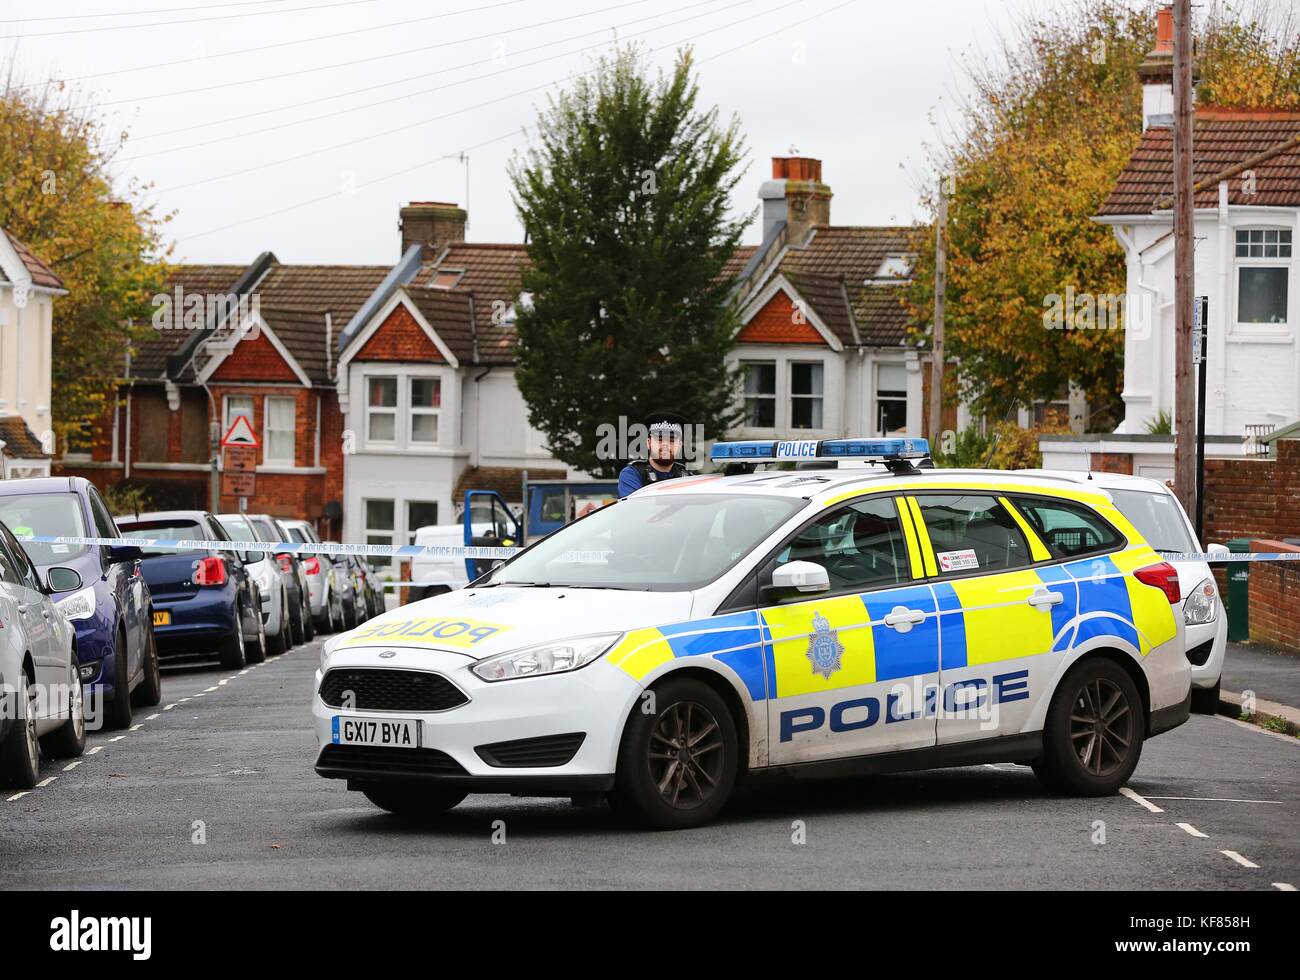 Brighton, UK. 26th October, 2017. Police outside a property on Sandgate Road in Brighton. A badly injured woman was found at the house early this morning after a man turned himself in at John Street Police Station in the City. Stock Photo